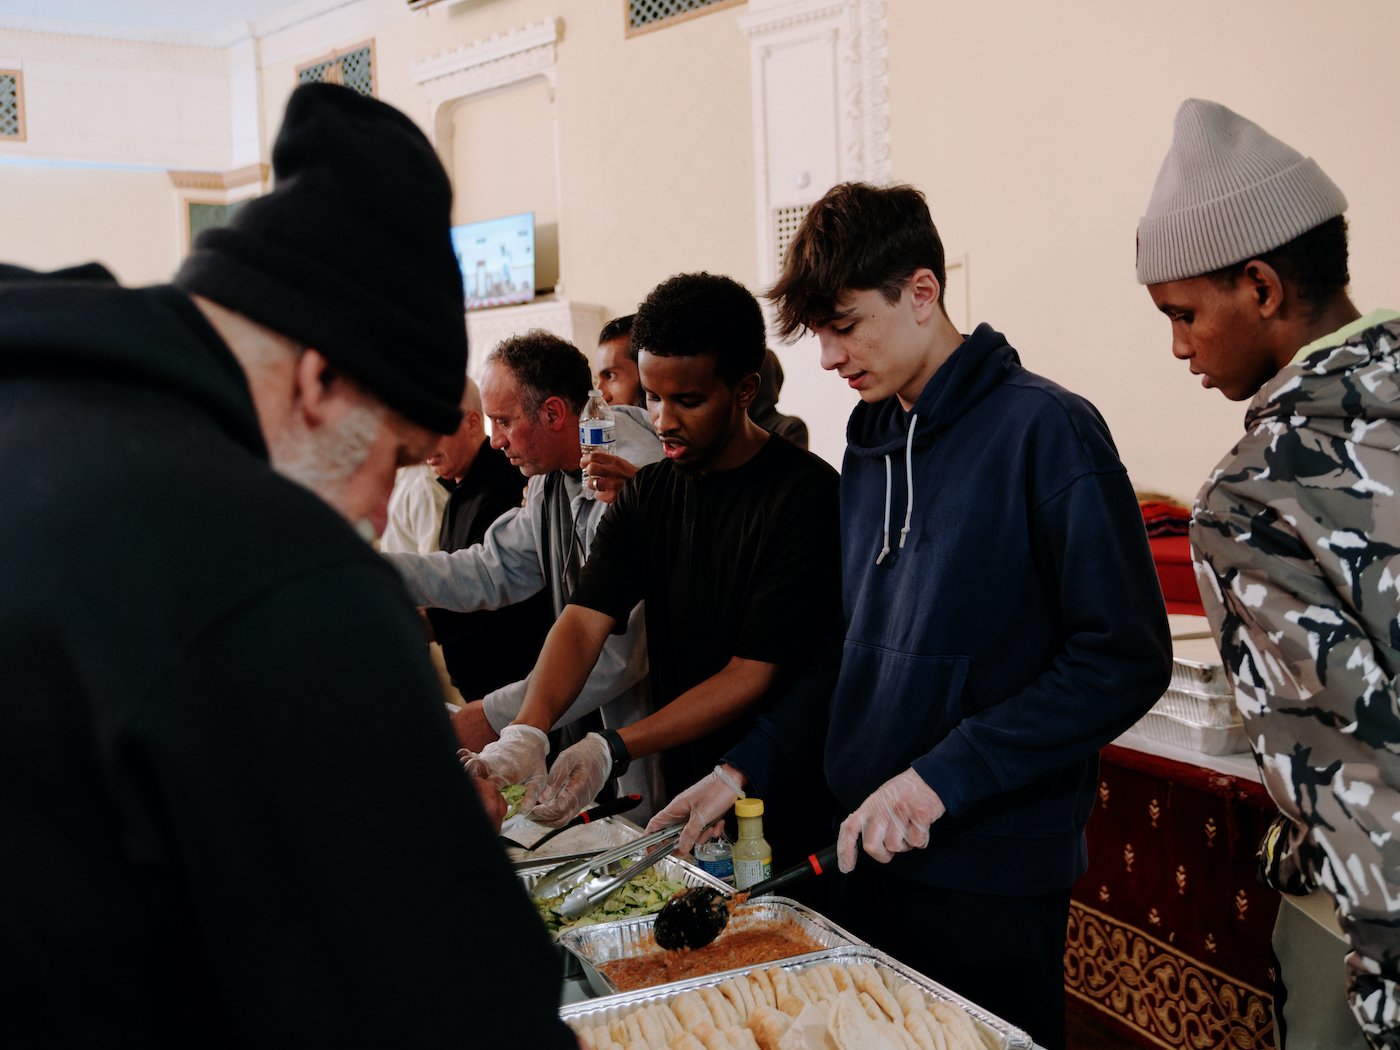 Young men stand behind a folding table and serve food from trays